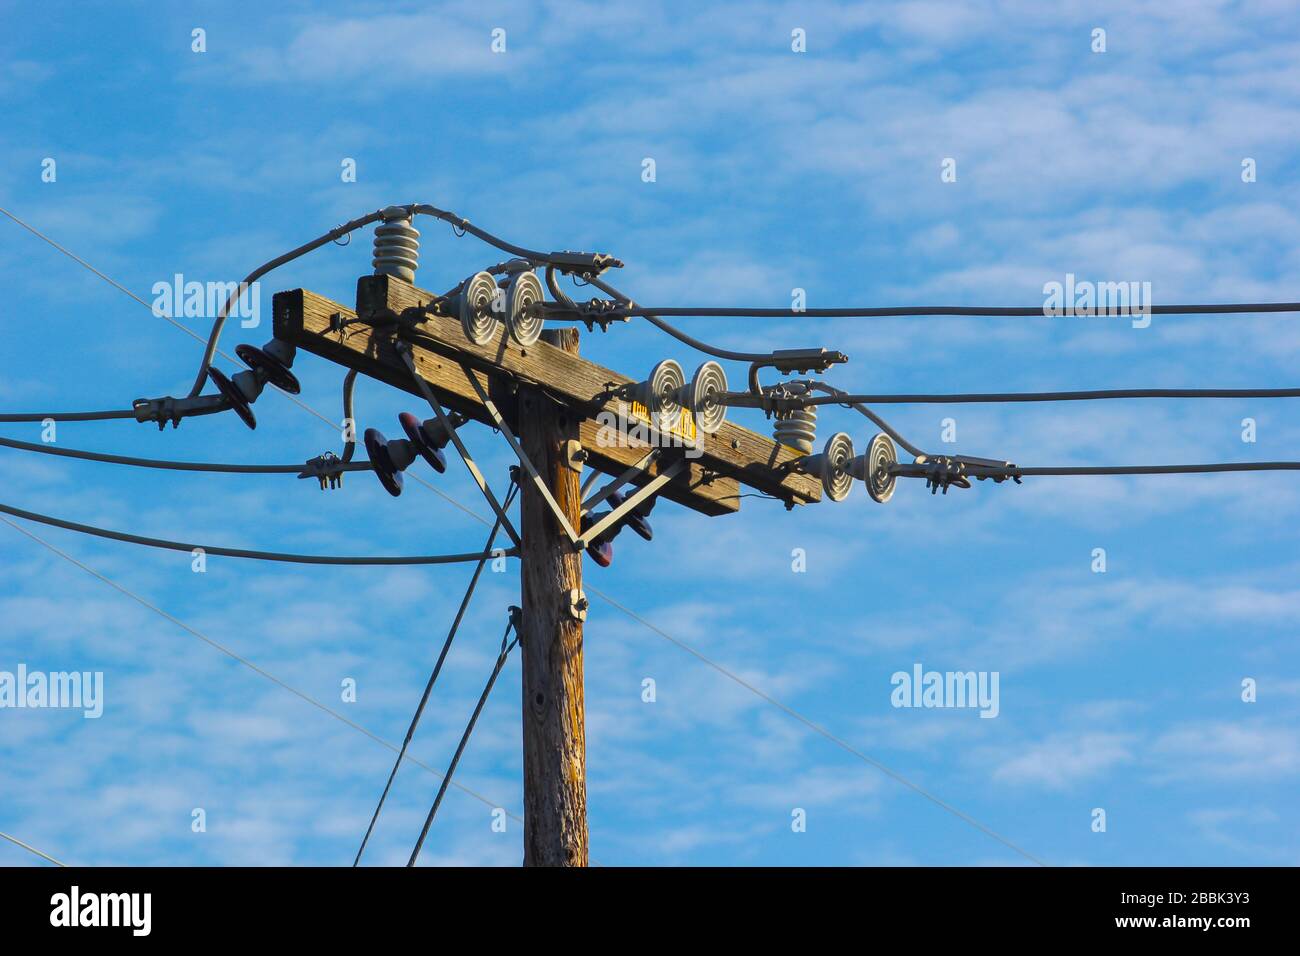 A towering electricity pole against a blue sky with white clouds Stock Photo